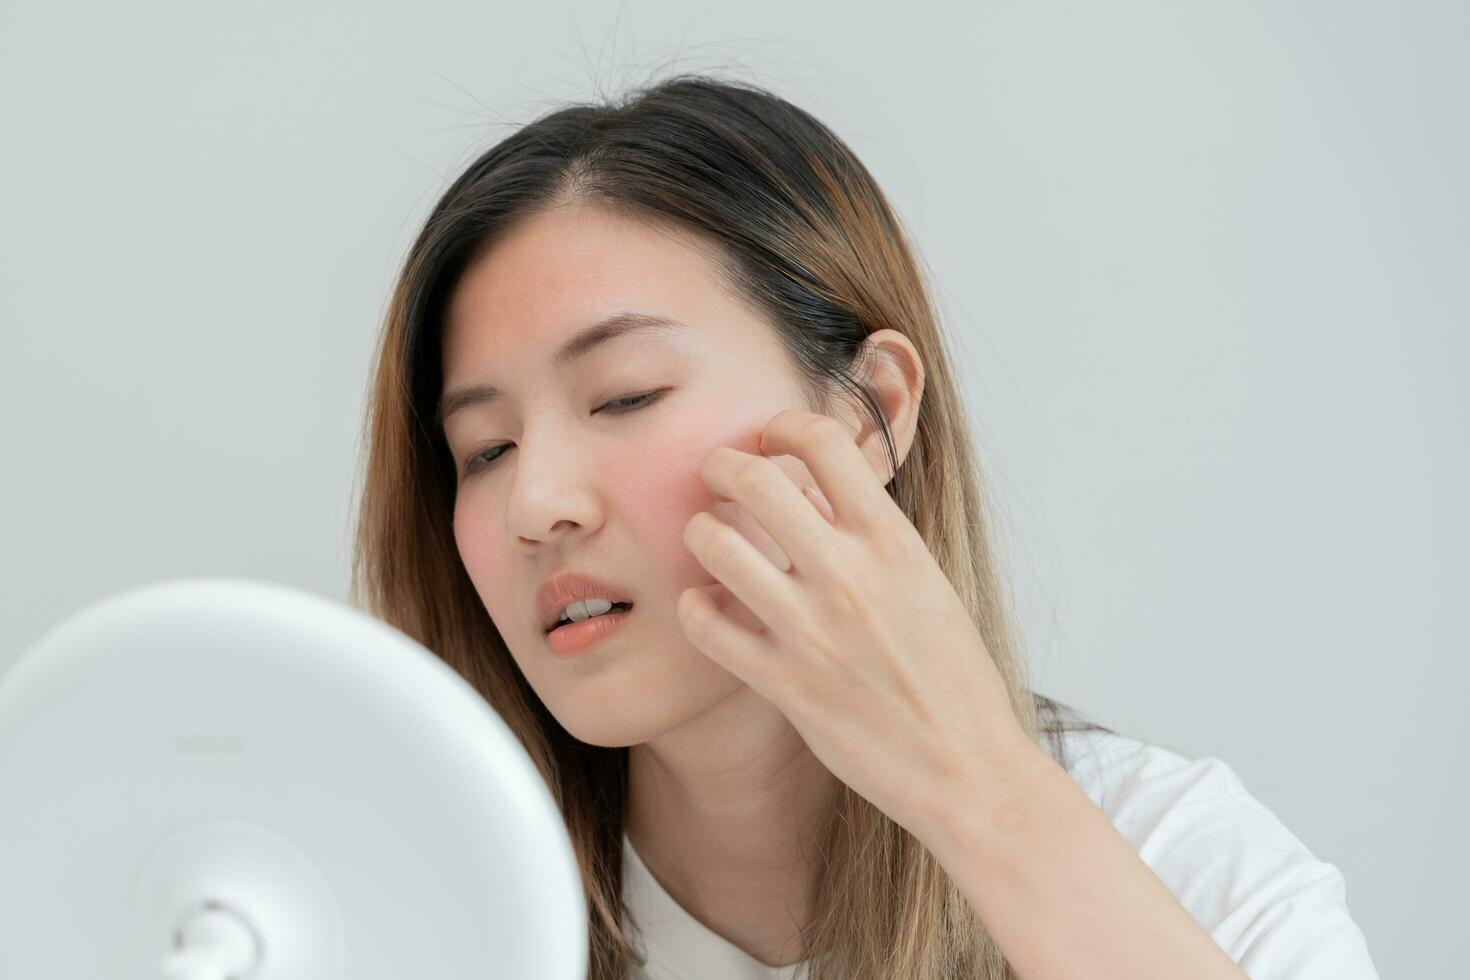 Young woman asian are worried about faces Dermatology and allergic to steroids in cosmetics. sensitive skin, red face from sunburn, acne, allergic to chemicals, rash on face. skin problems and beauty photo